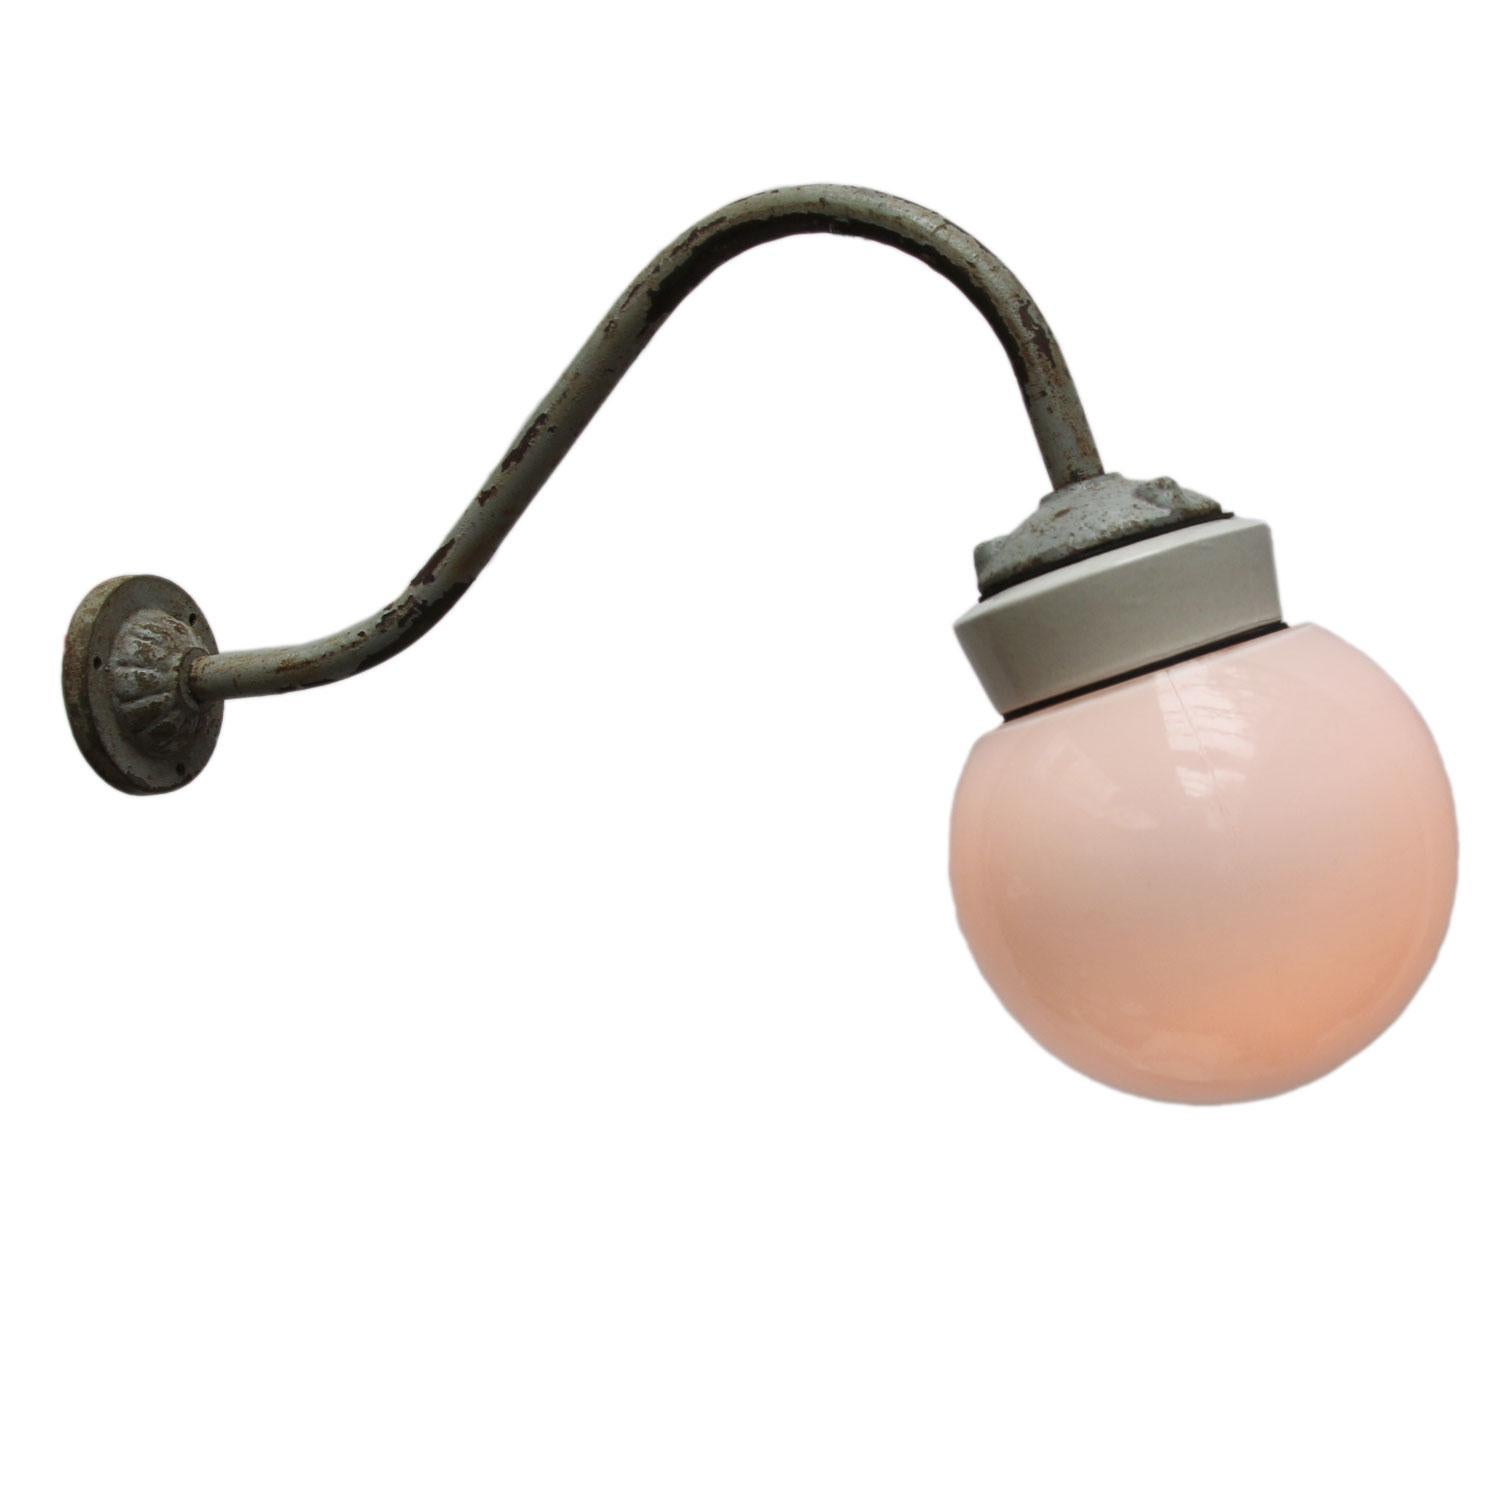 Vintage industrial wall light.
Cast iron and porcelain top. Opaline glass globe. 
Diameter cast iron wall mount: 9 cm, three holes to secure.

Weight: 2.0 kg / 4.4 lb

Priced per individual item. All lamps have been made suitable by international